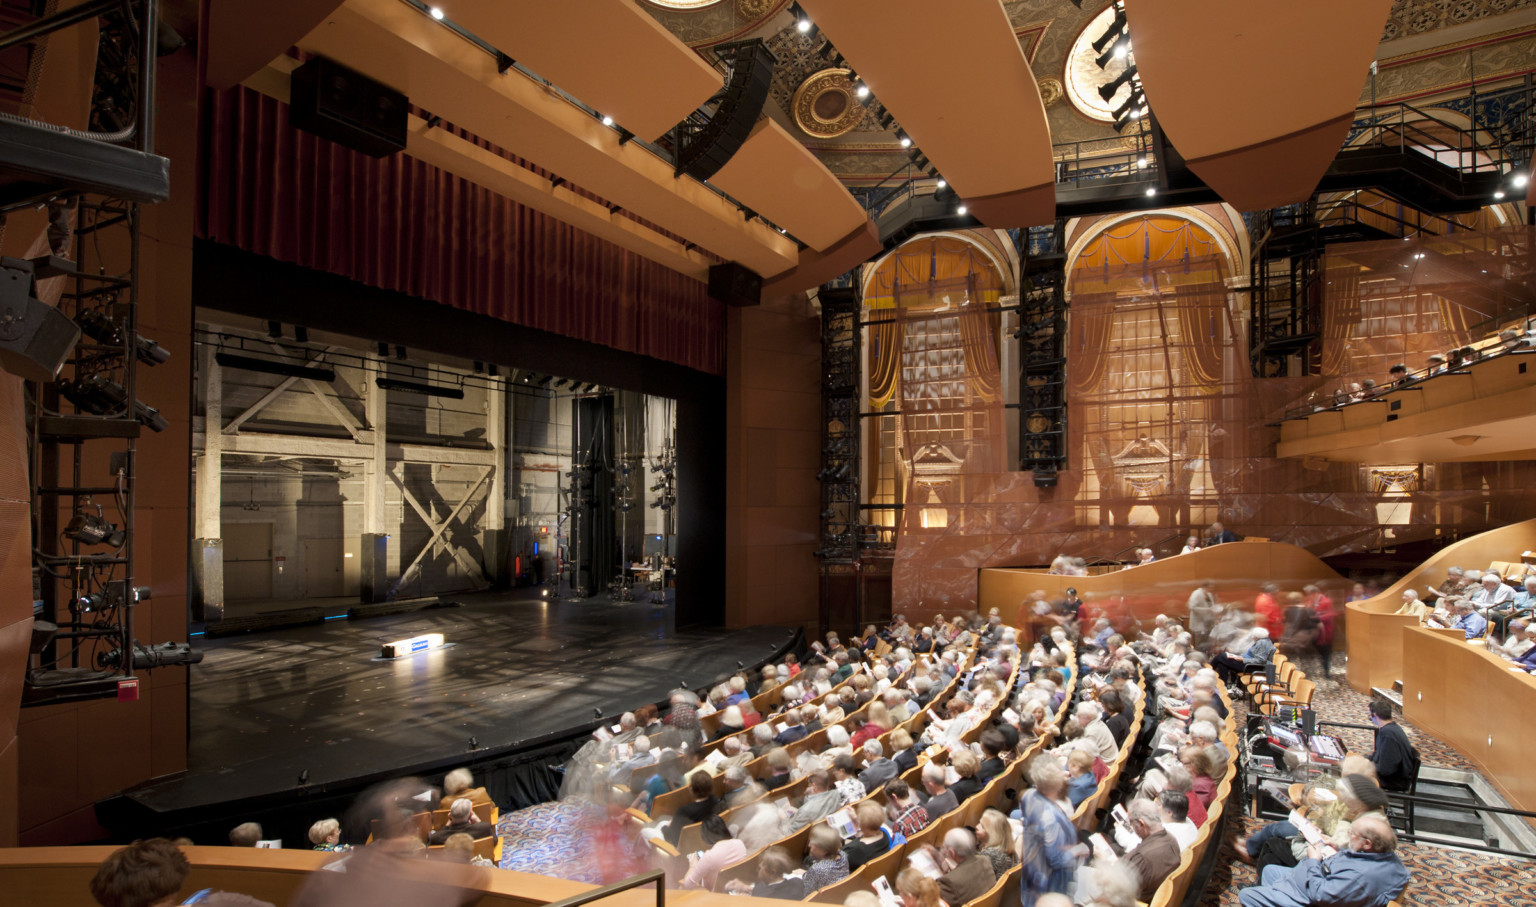 Theater seen from the side over the audience with large arch shaped windows. The stage is empty and stage right can be seen